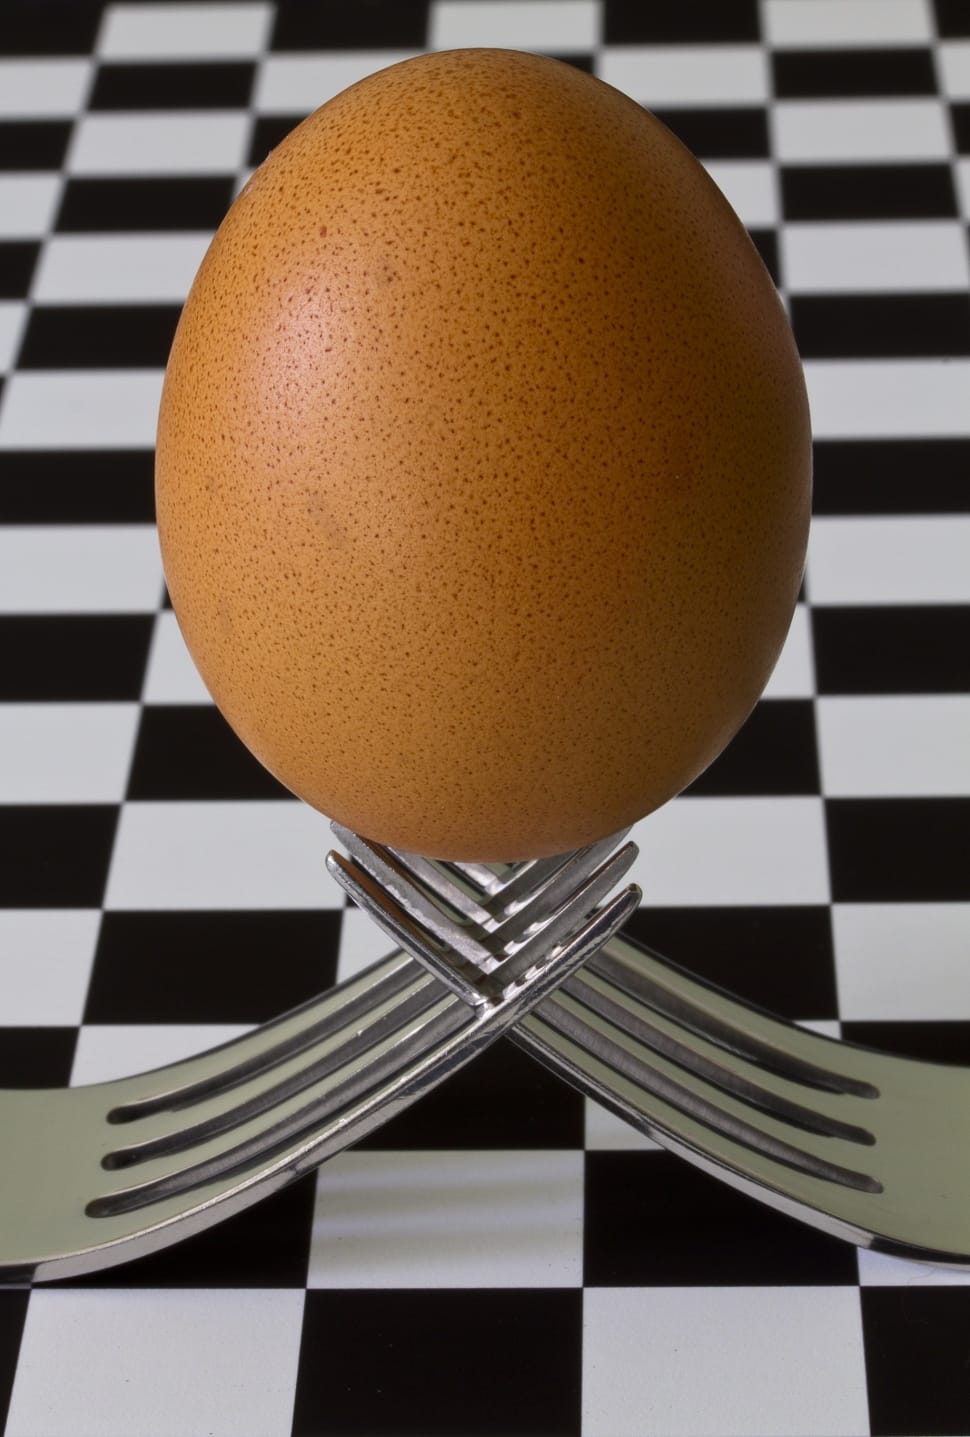 two stainless steel forks and brown egg preview